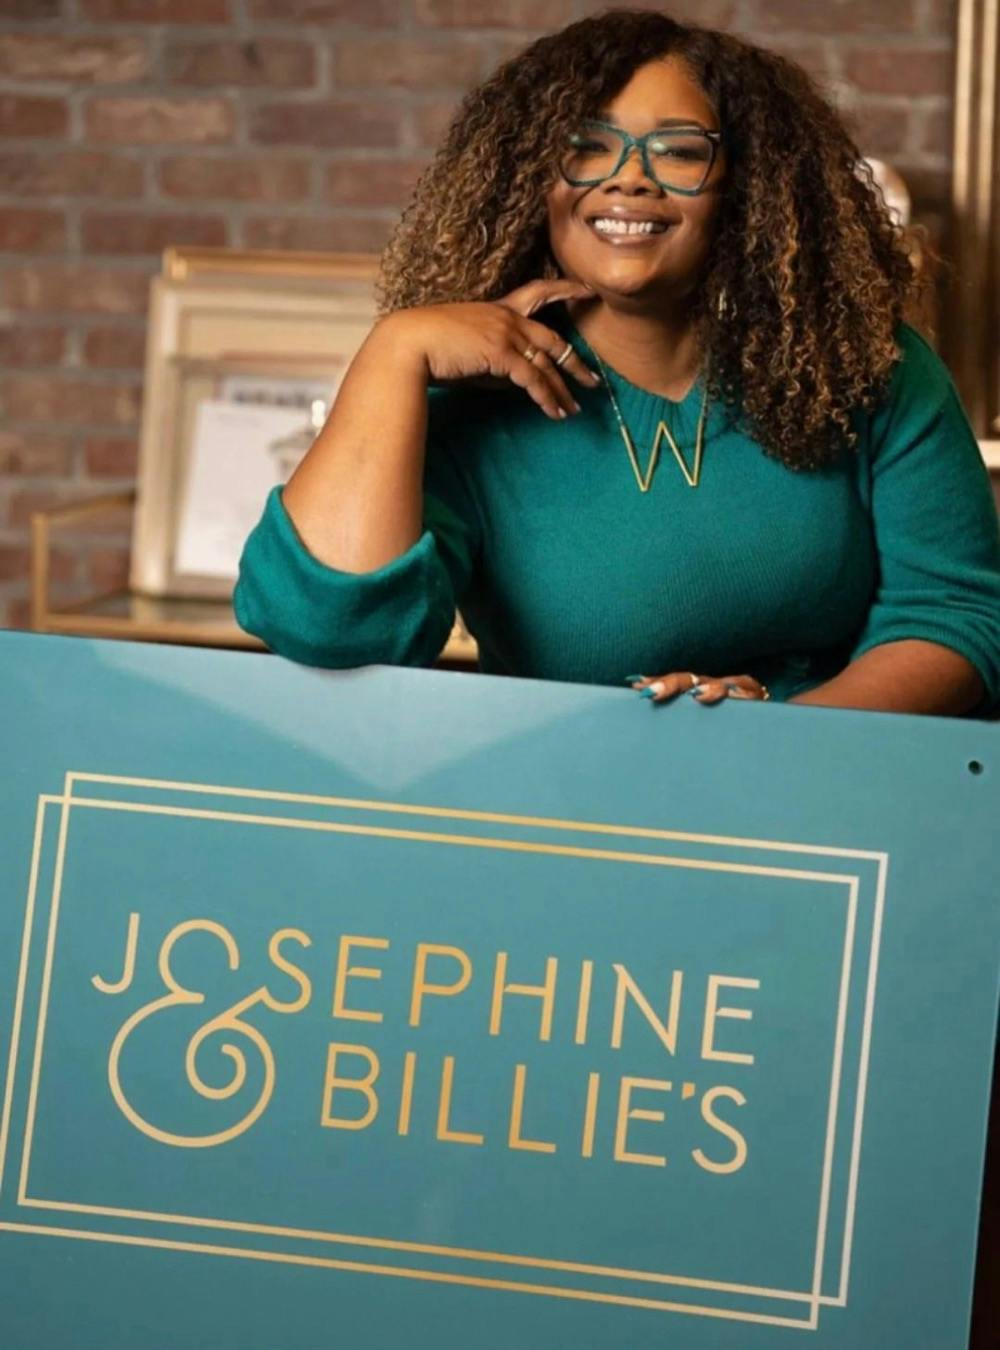 Whitney Beatty, holding sign that reads "Josephine & Billie's".